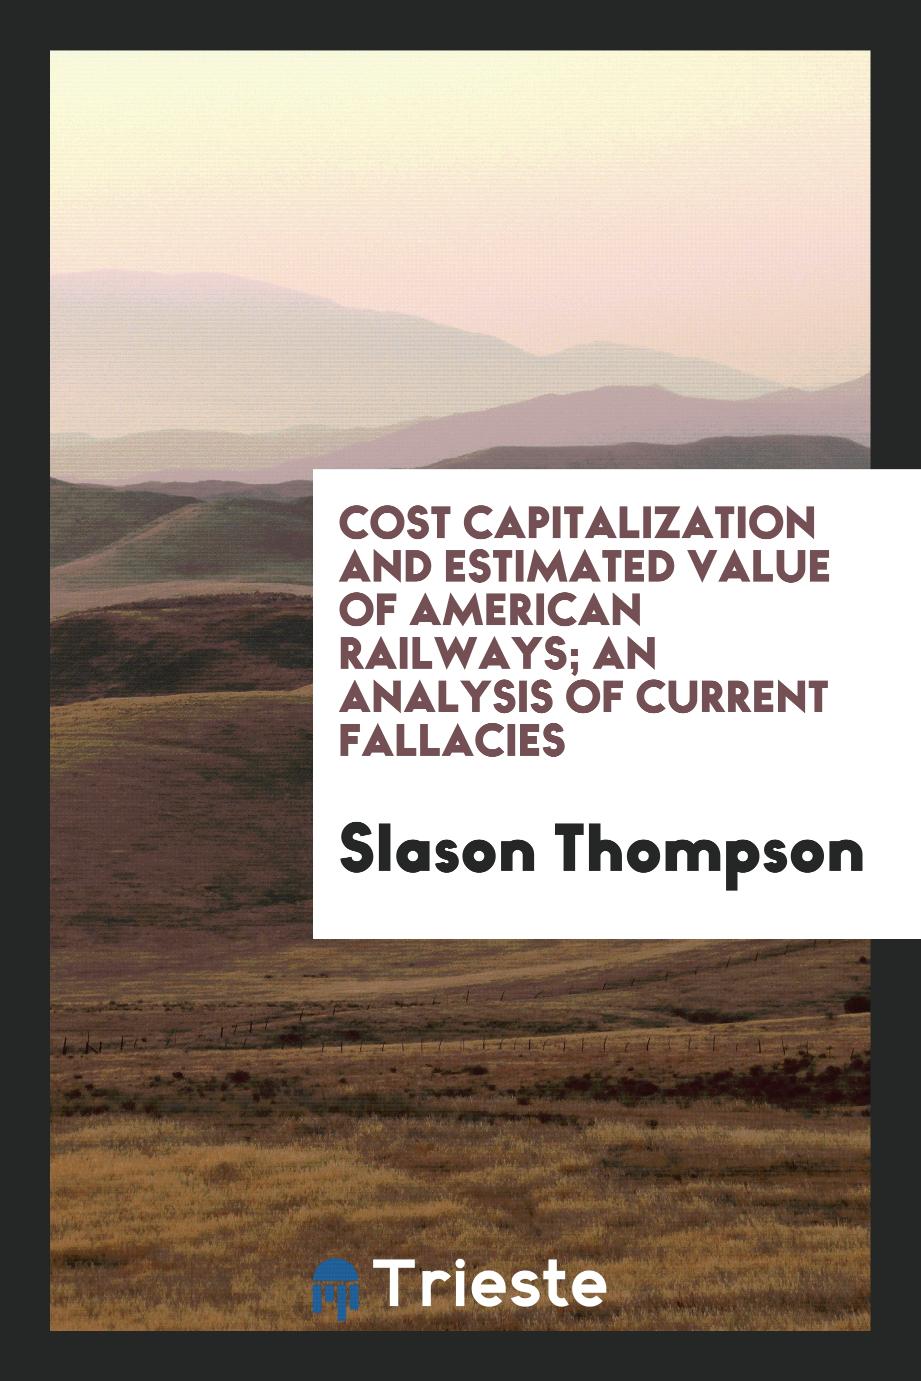 Cost capitalization and estimated value of American railways; an analysis of current fallacies